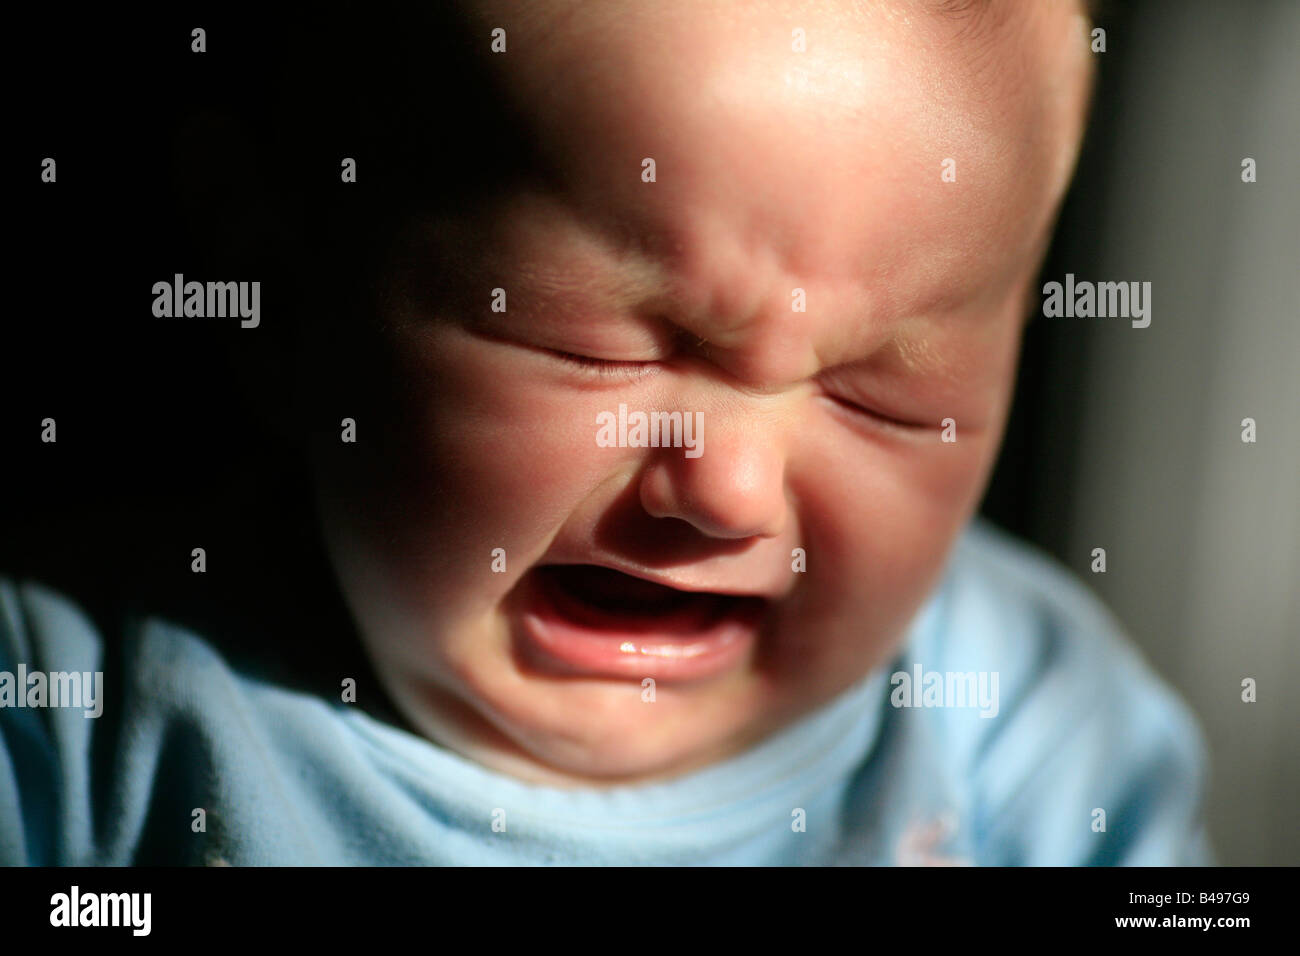 5 month old baby girl crying Stock Photo